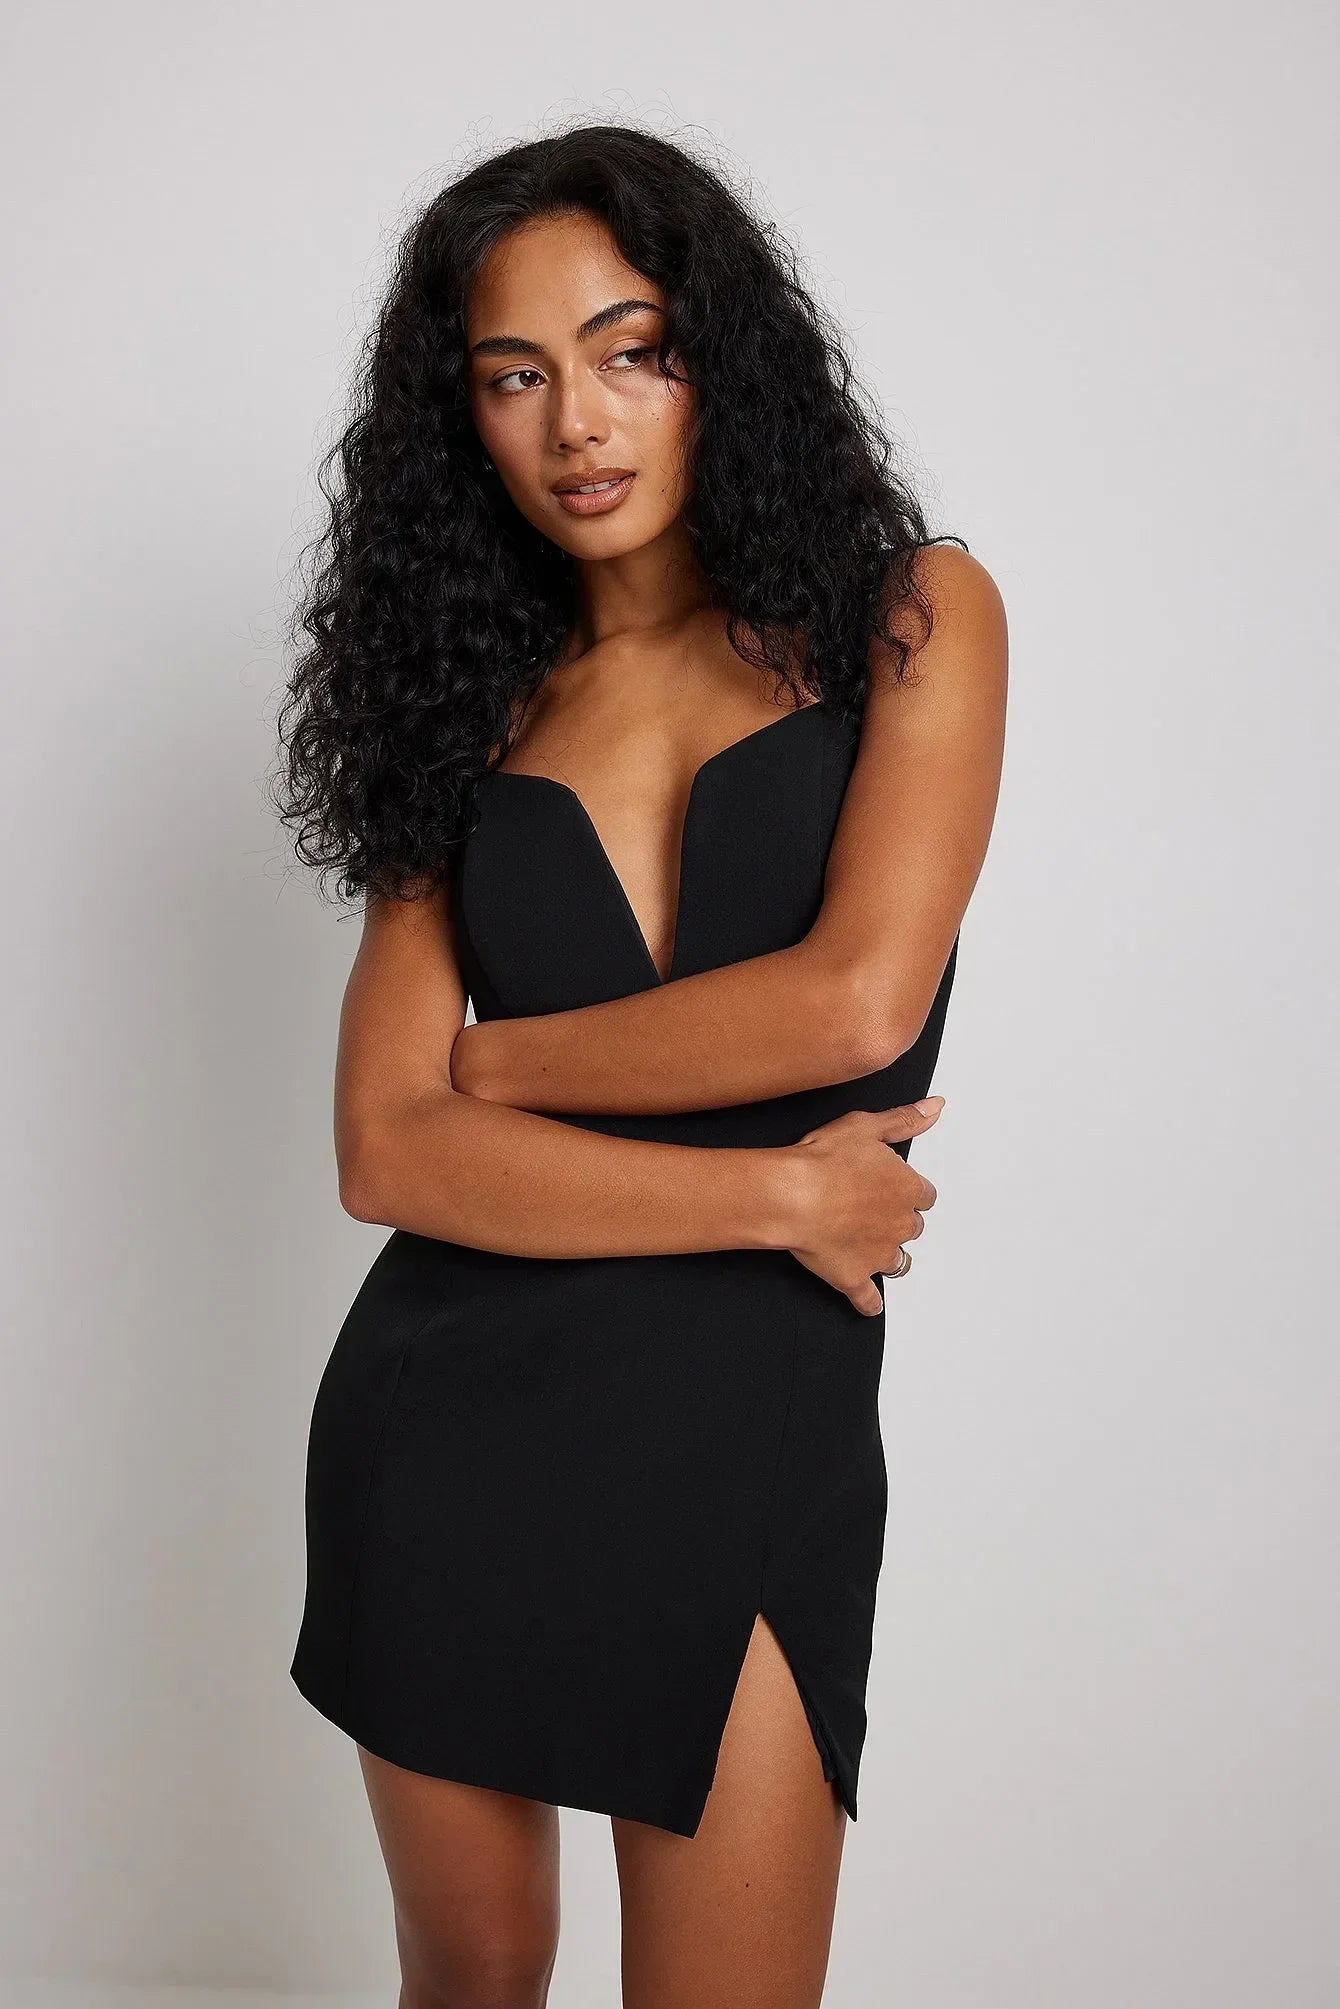 DEEP NECKLINE MINI DRESS - EXCLUSIVE  from NA-KD - Just €64! SHOP NOW AT IAMINHATELOVE BOTH IN STORE FOR CYPRUS AND ONLINE WORLDWIDE @ IAMINHATELOVE.COM